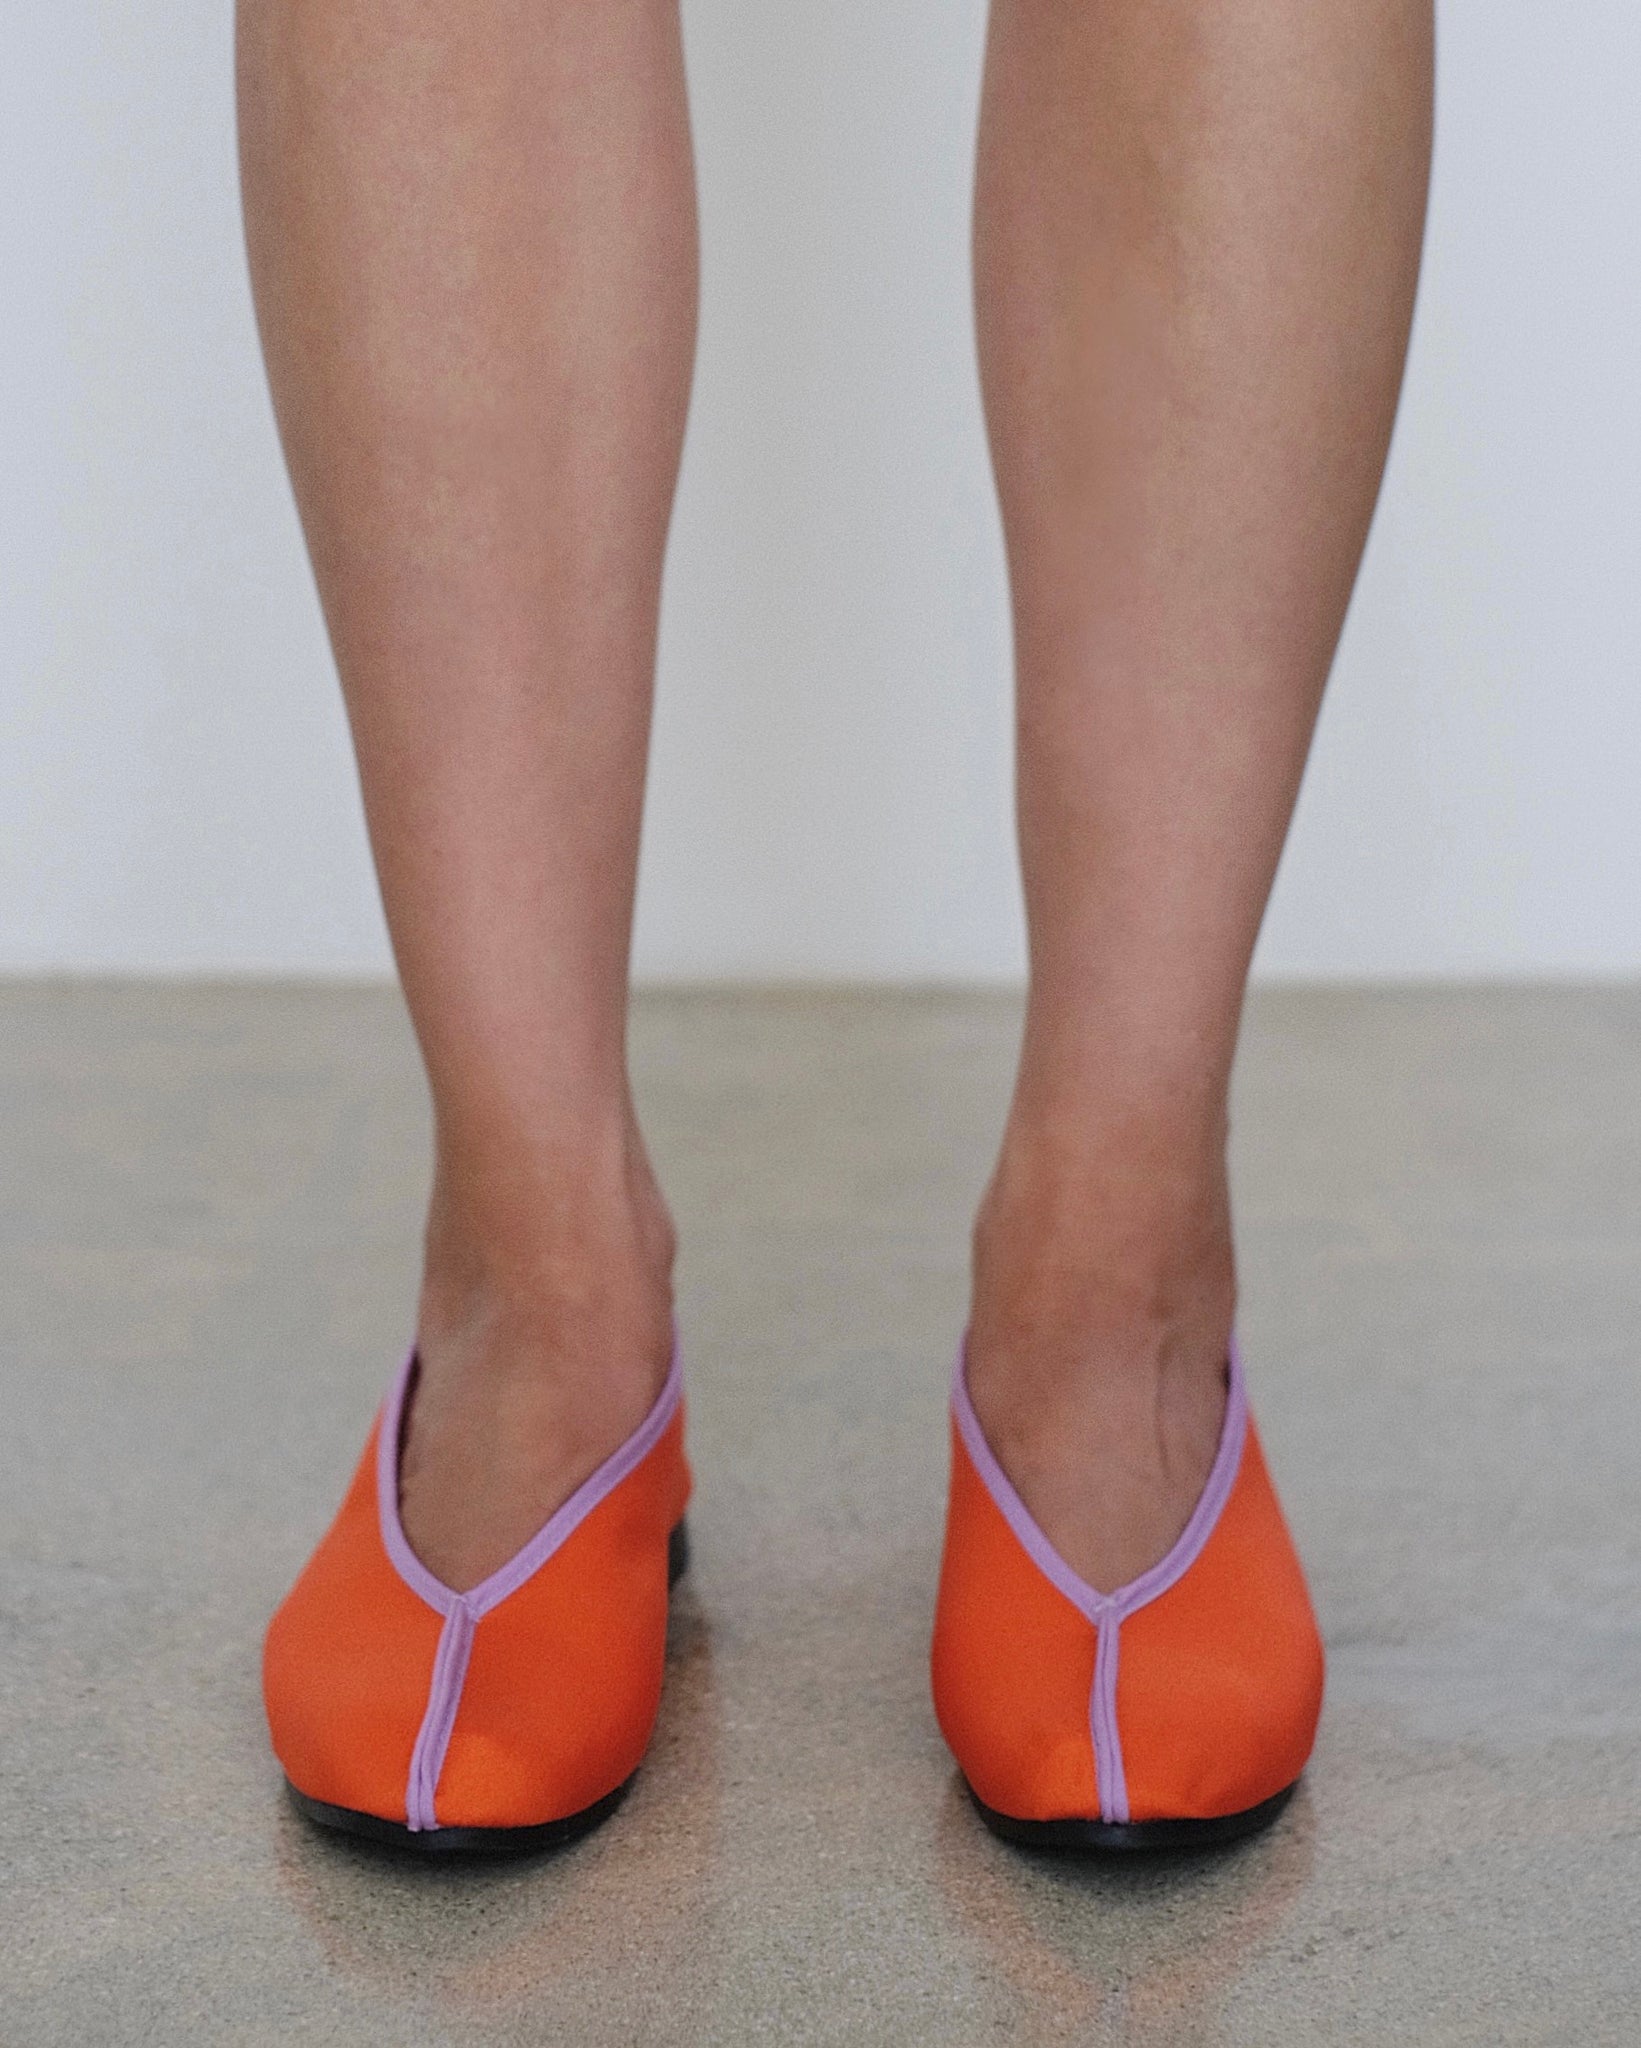 Wax Apple Theater Shoe in Orange Satin with Lilac Piping